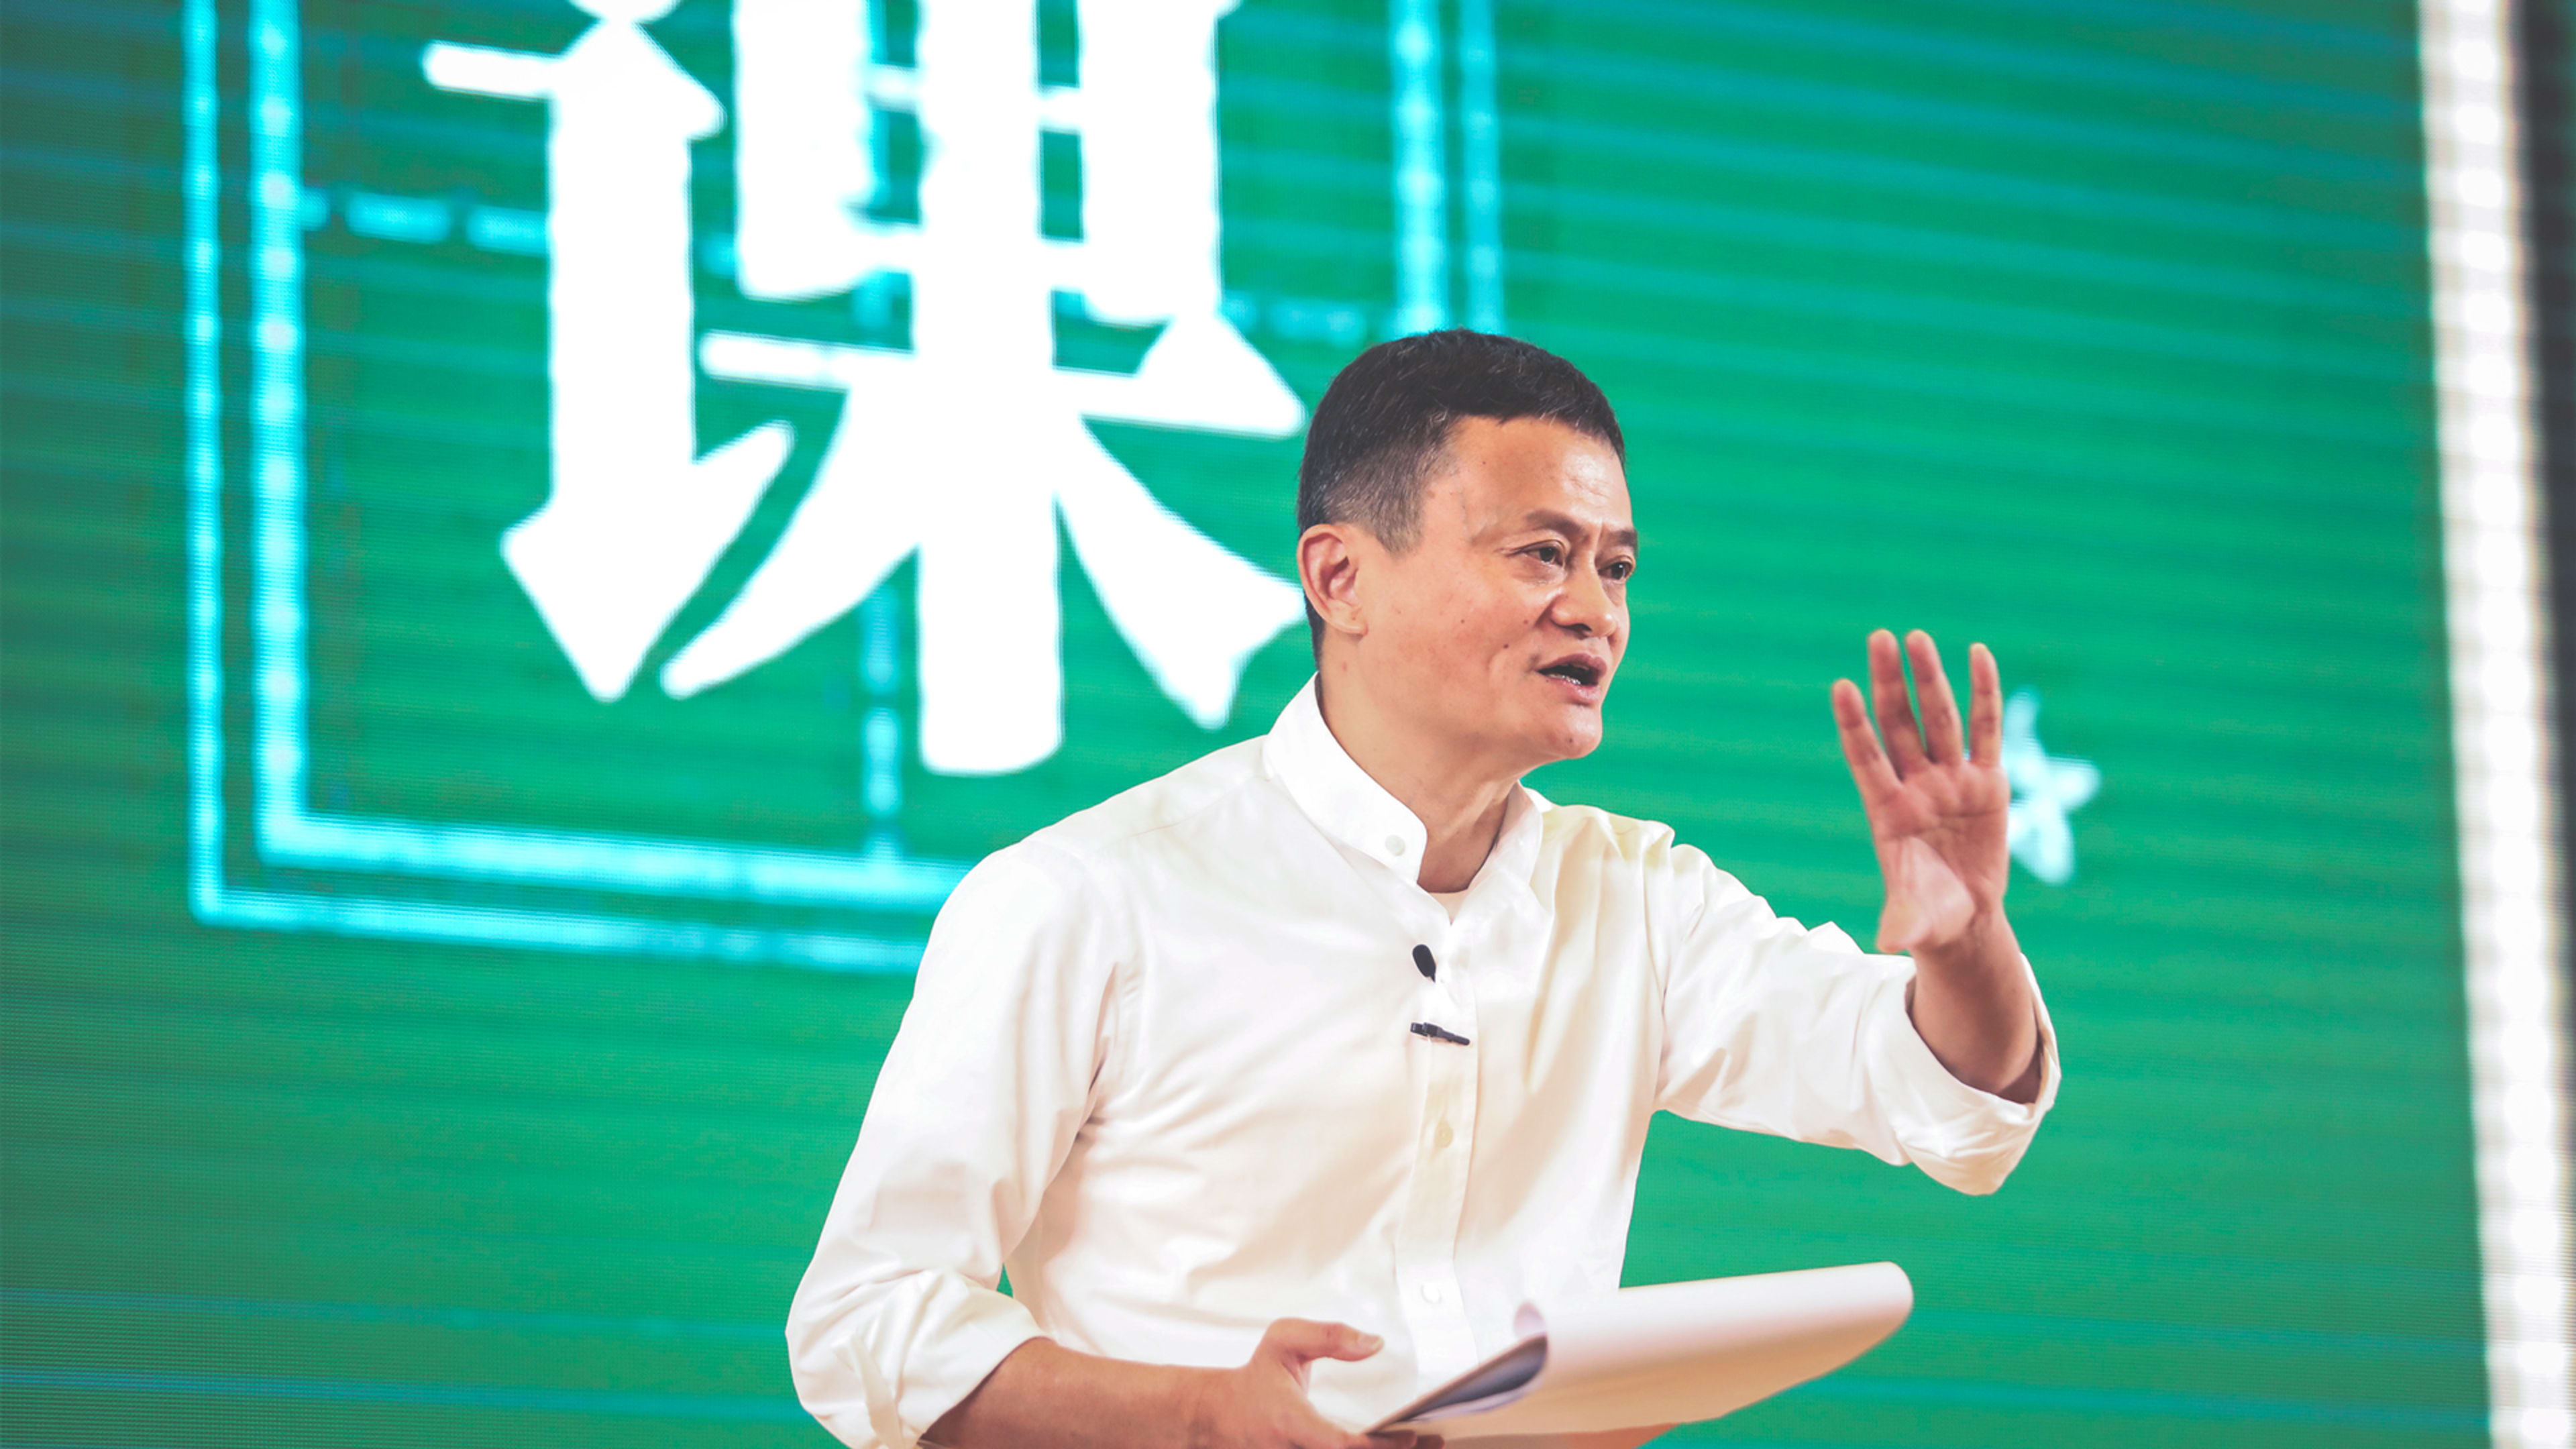 Jack Ma’s spat with China is part of a larger antitrust crackdown